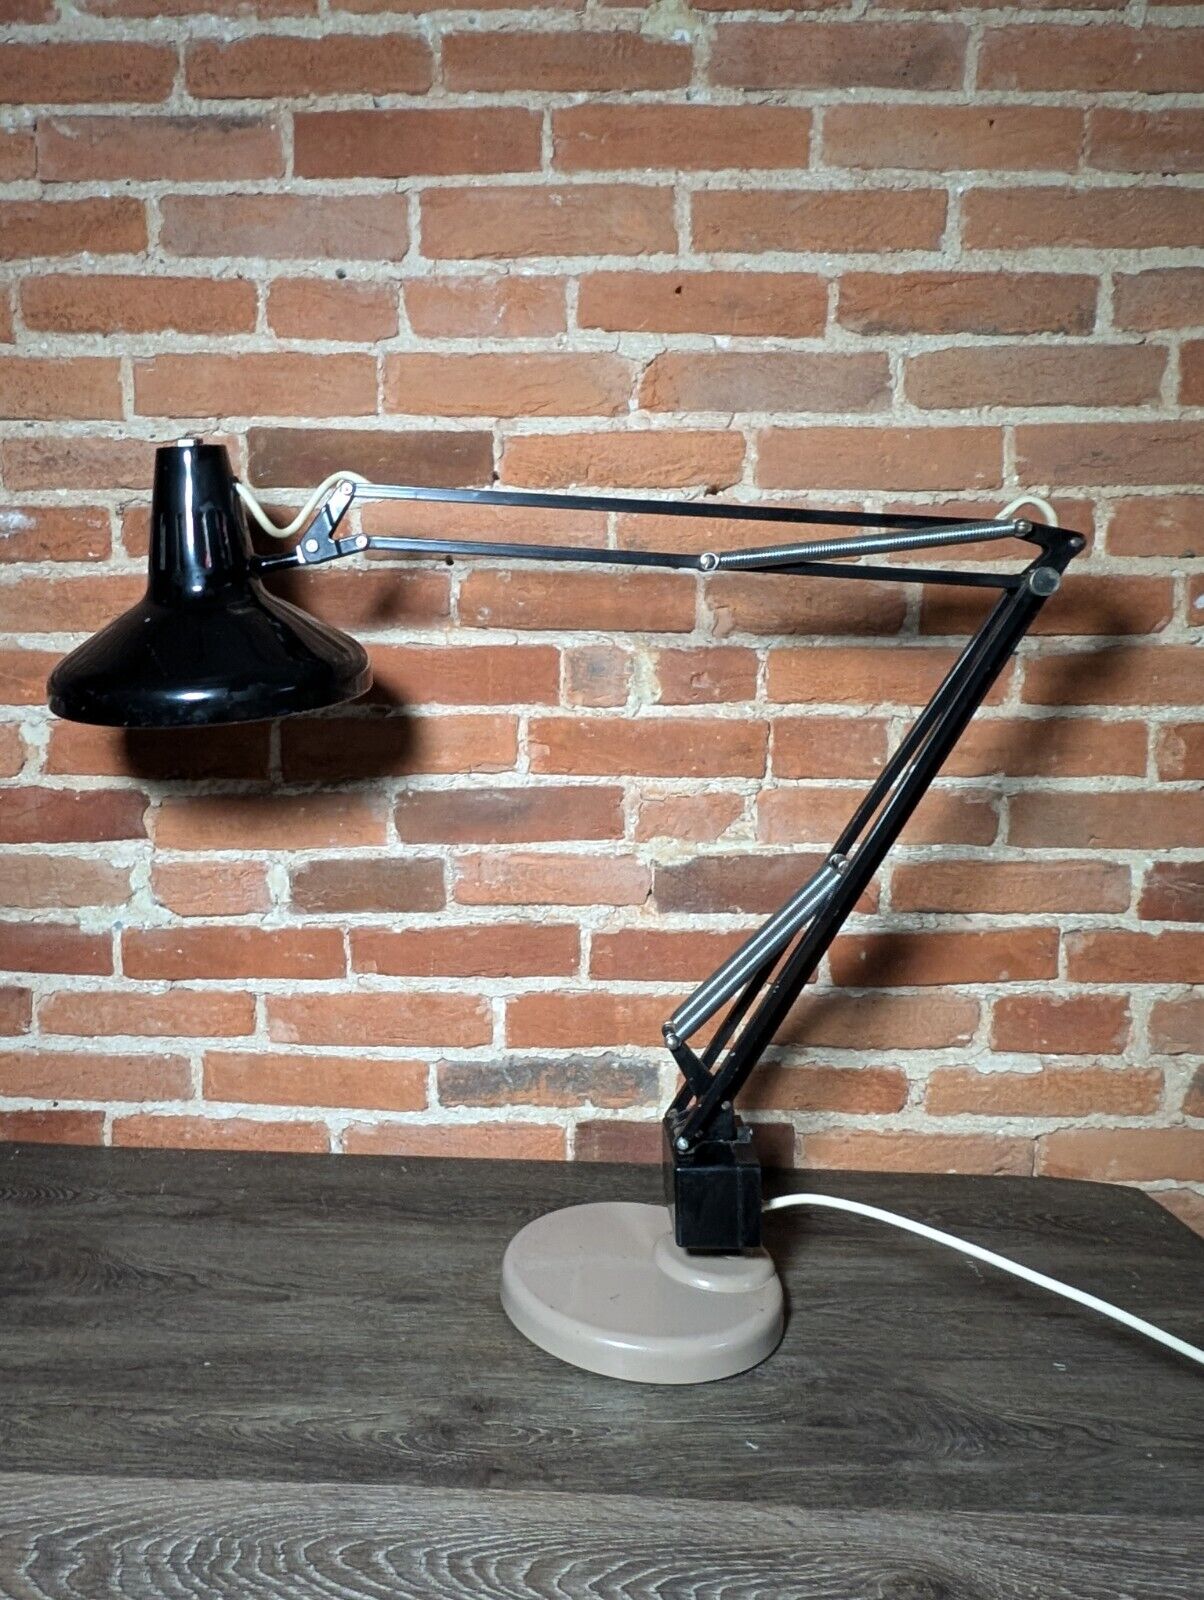 LUXO ARTICULATING ARM ARCHITECT DRAFTING DESK LAMP WEIGHTED BASE COLOR CORRECT